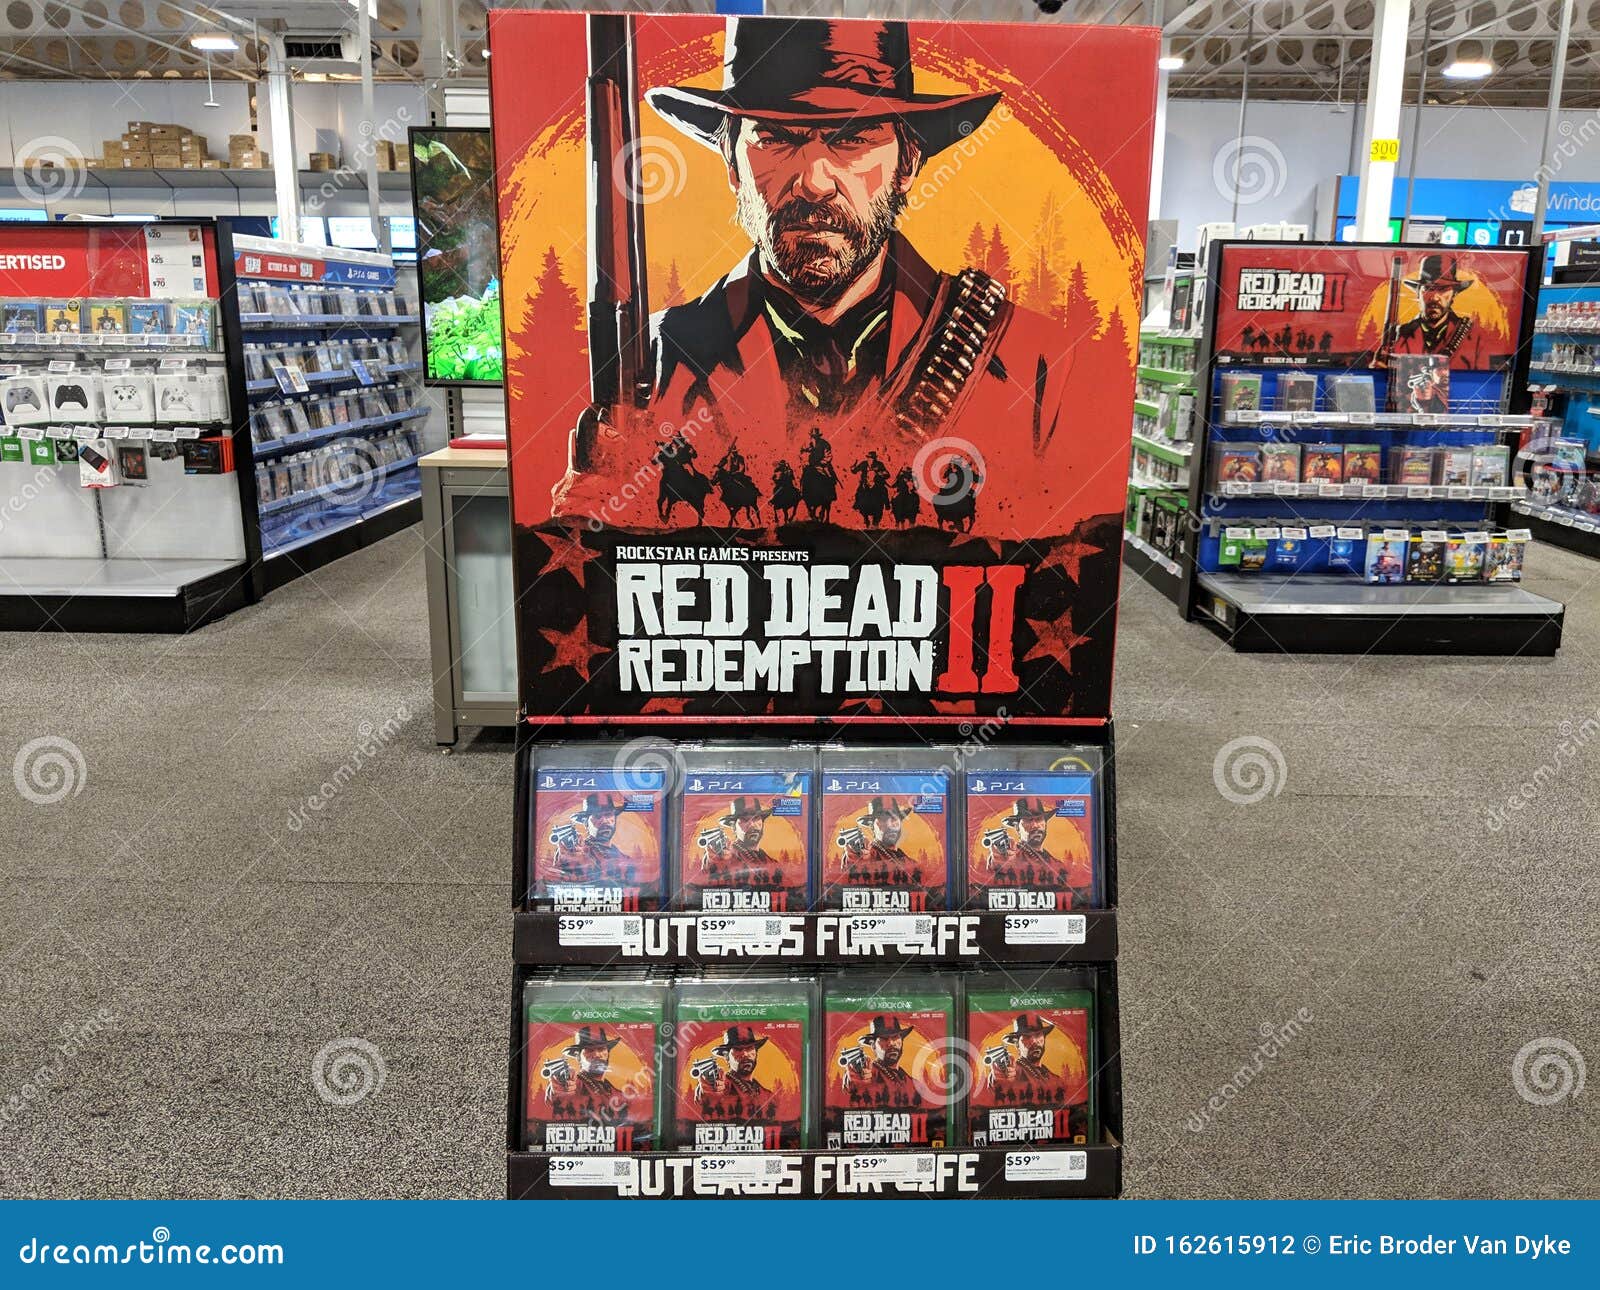 xbox marketplace red dead redemption 2